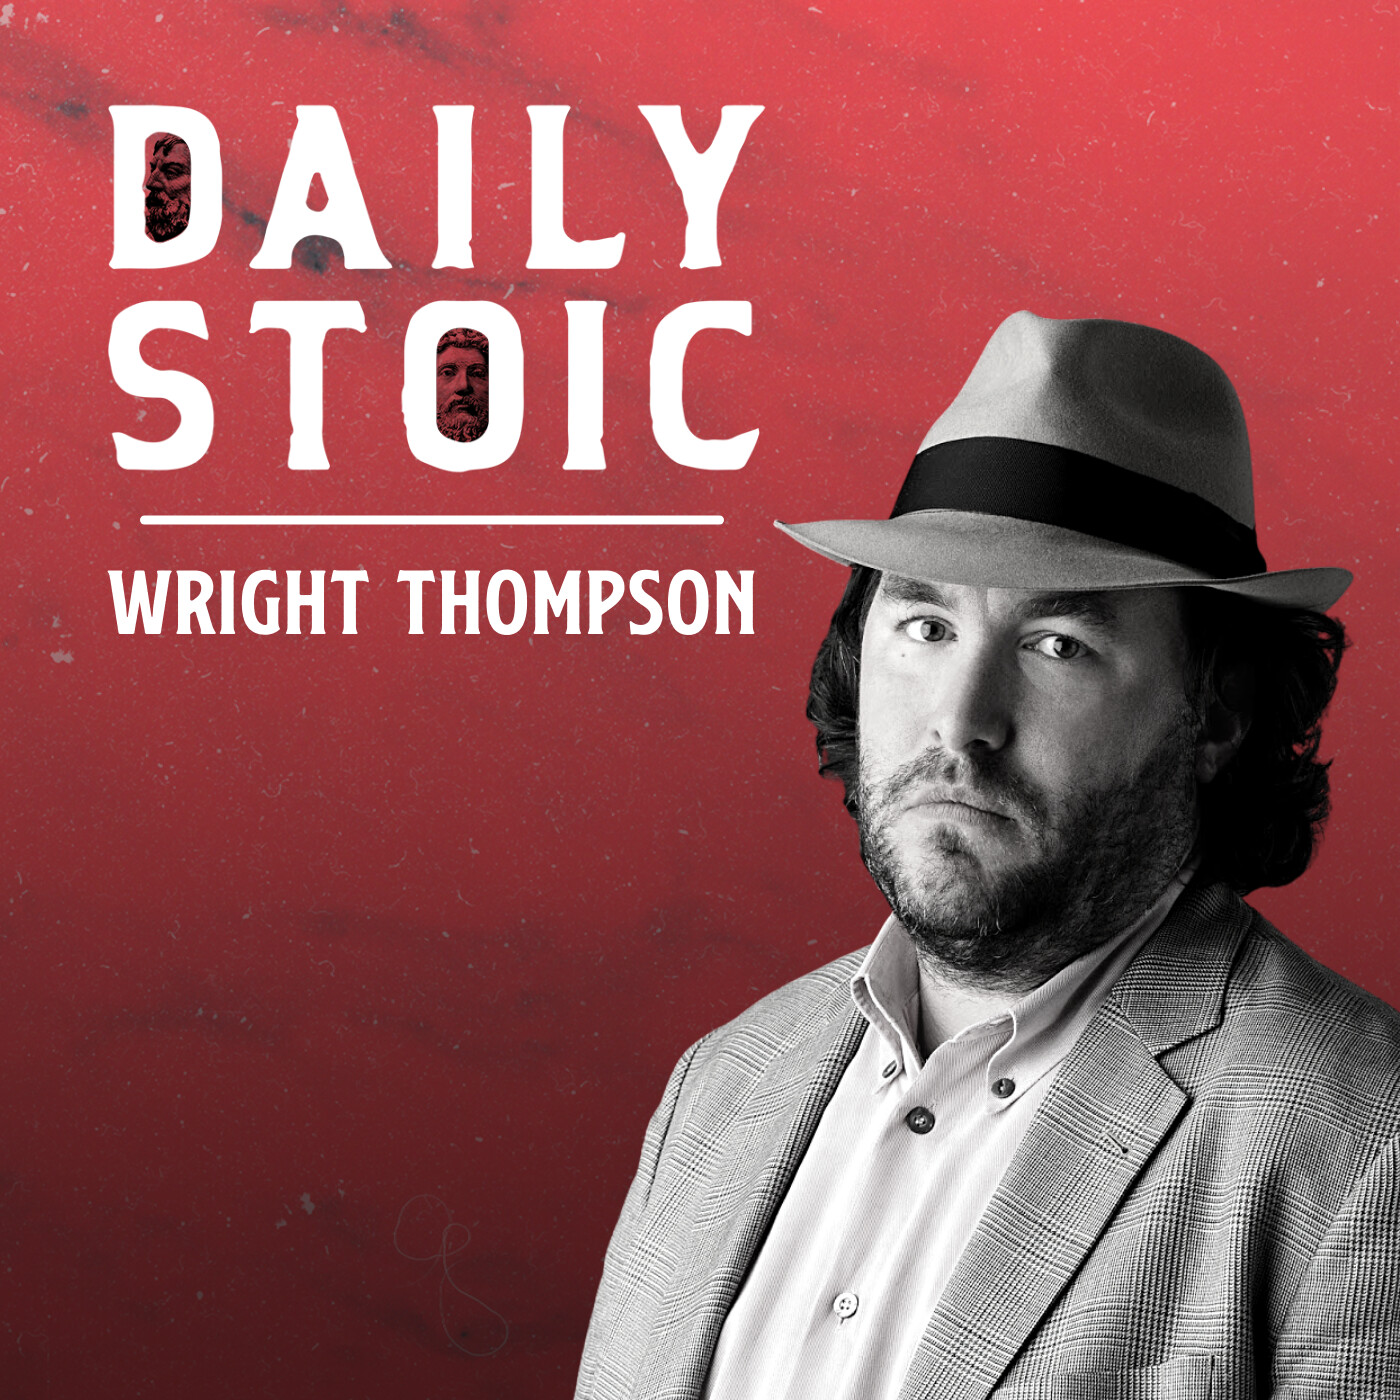 Wright Thompson On The Costs Of Greatness Throughout History